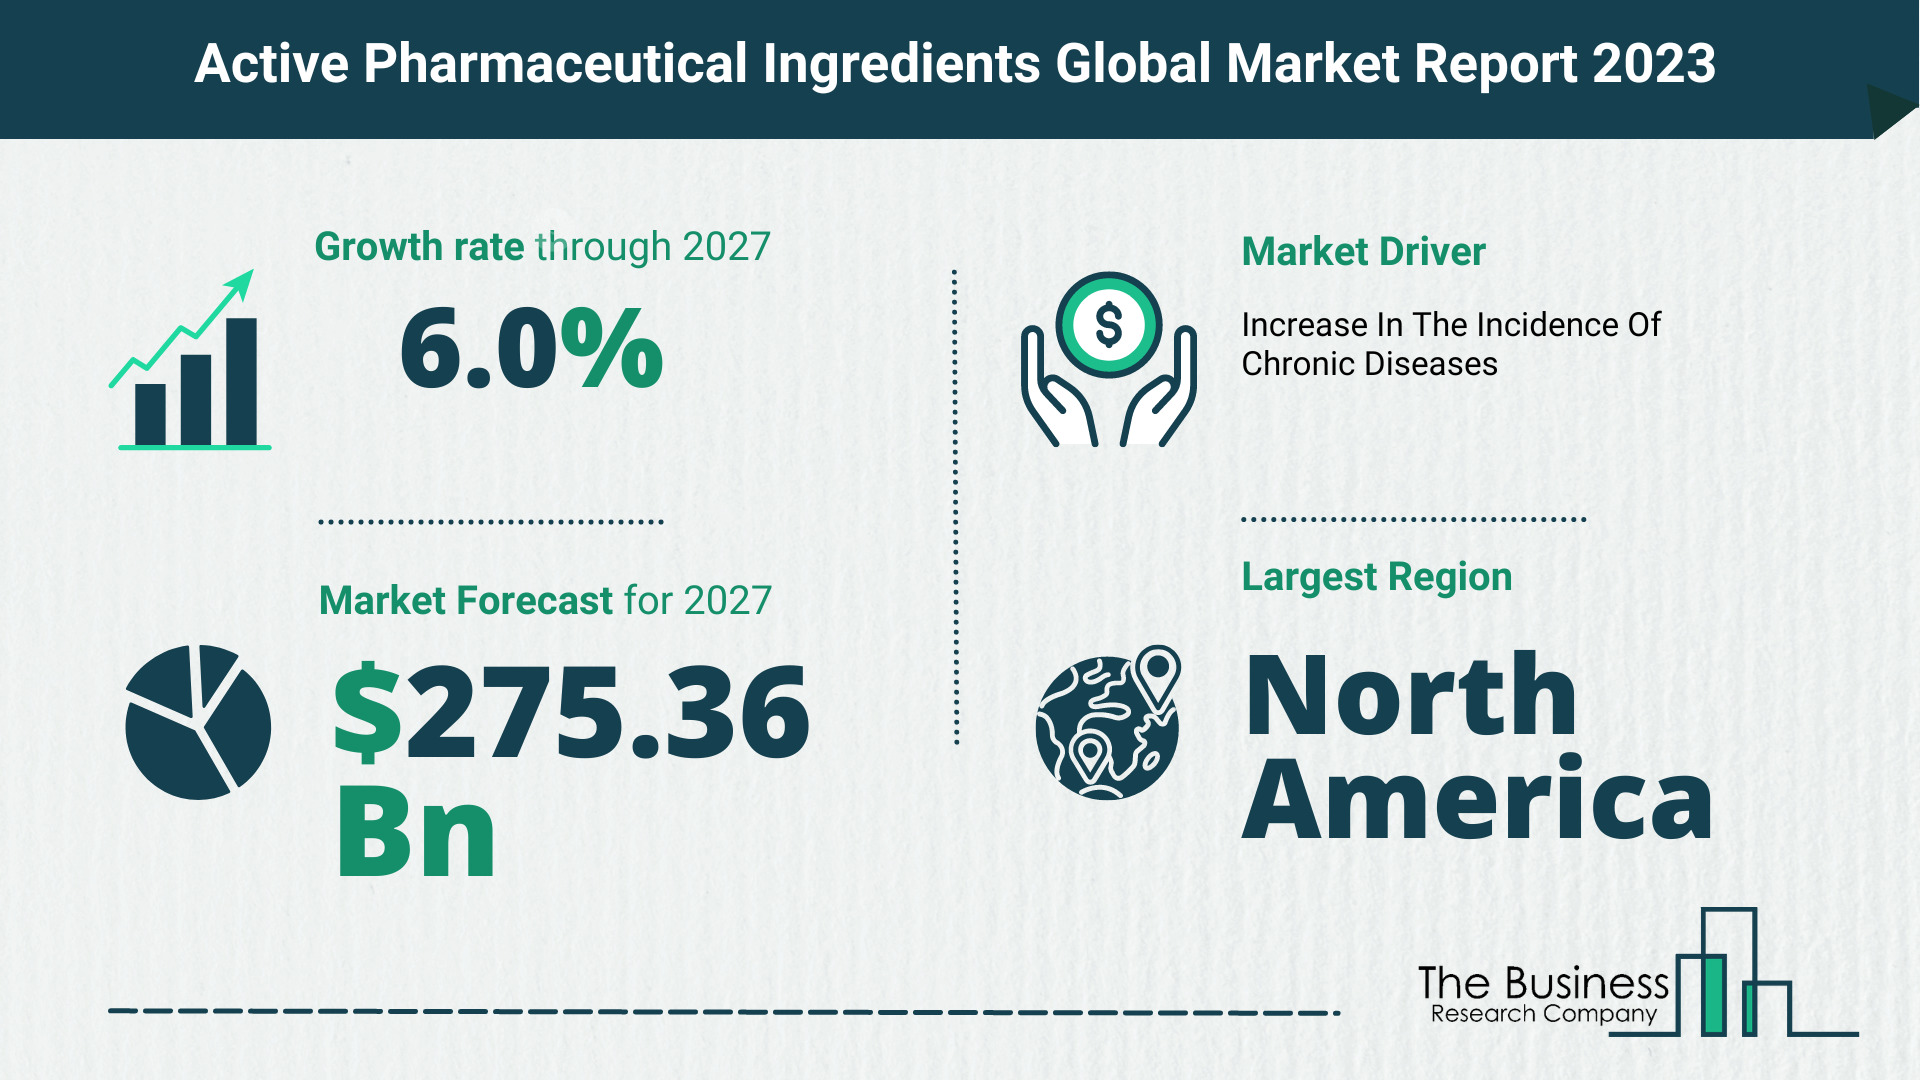 Active Pharmaceutical Ingredients Market Size, Share, And Growth Rate Analysis 2023